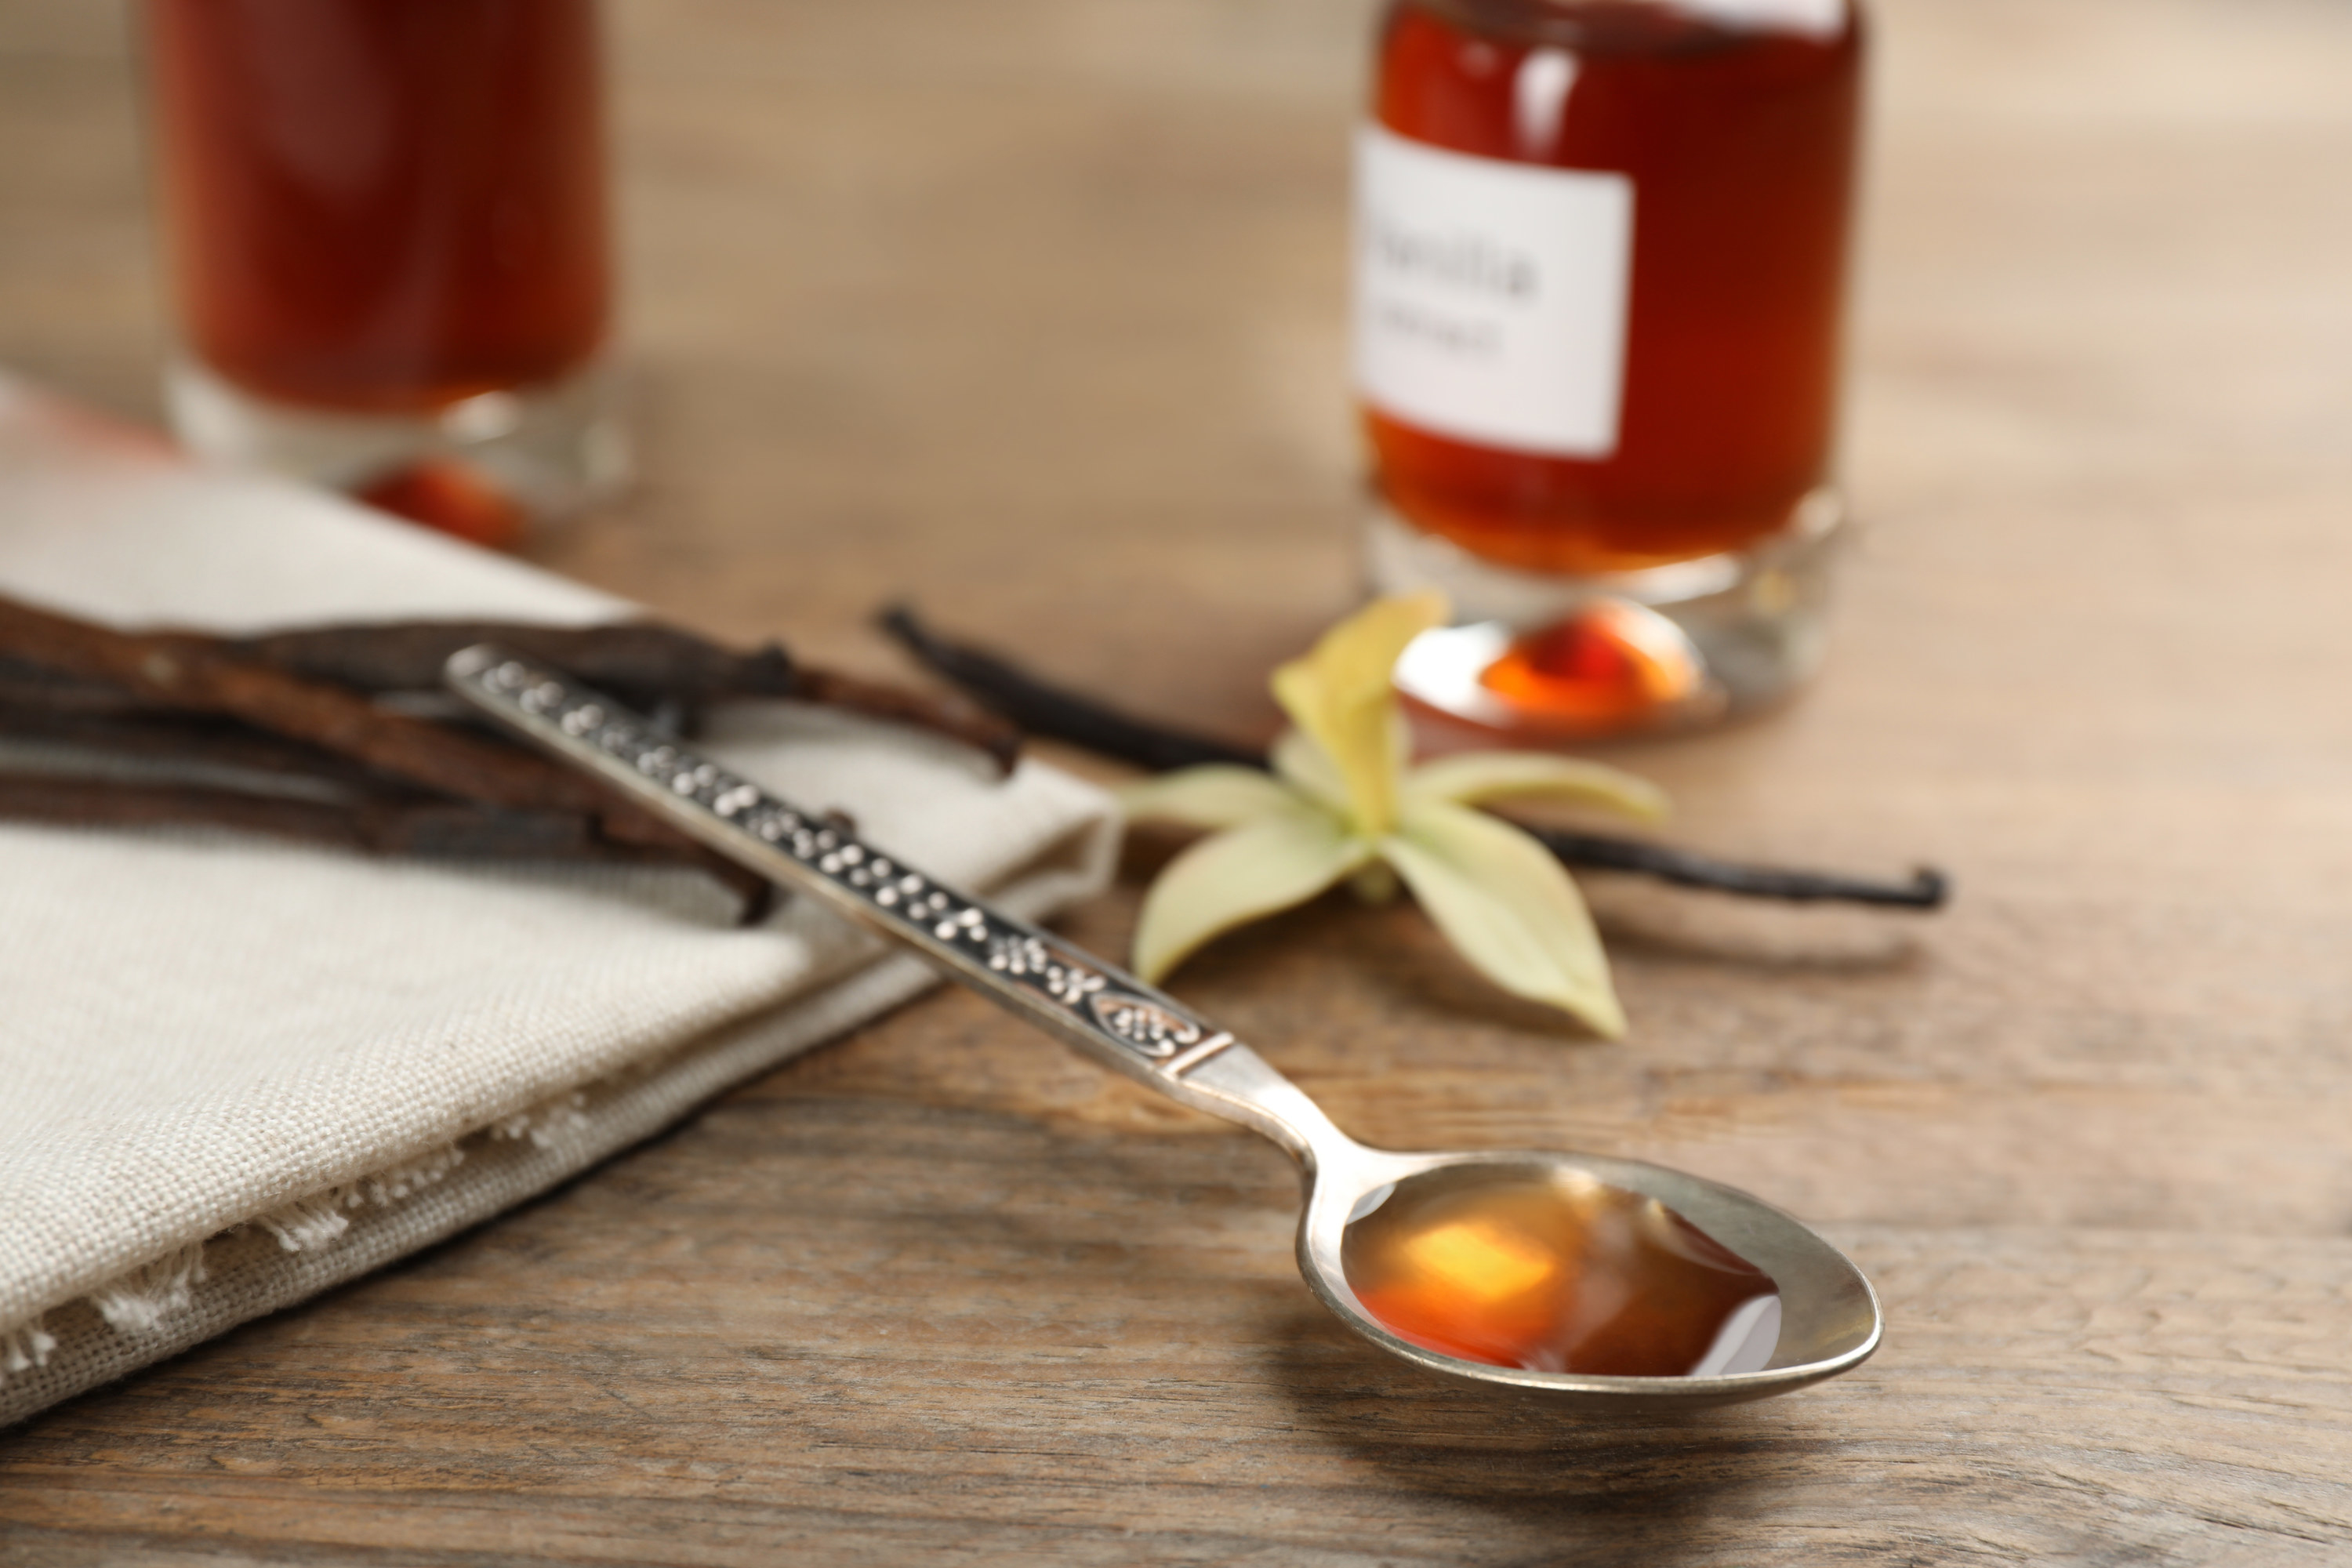 A spoonful of vanilla extract.